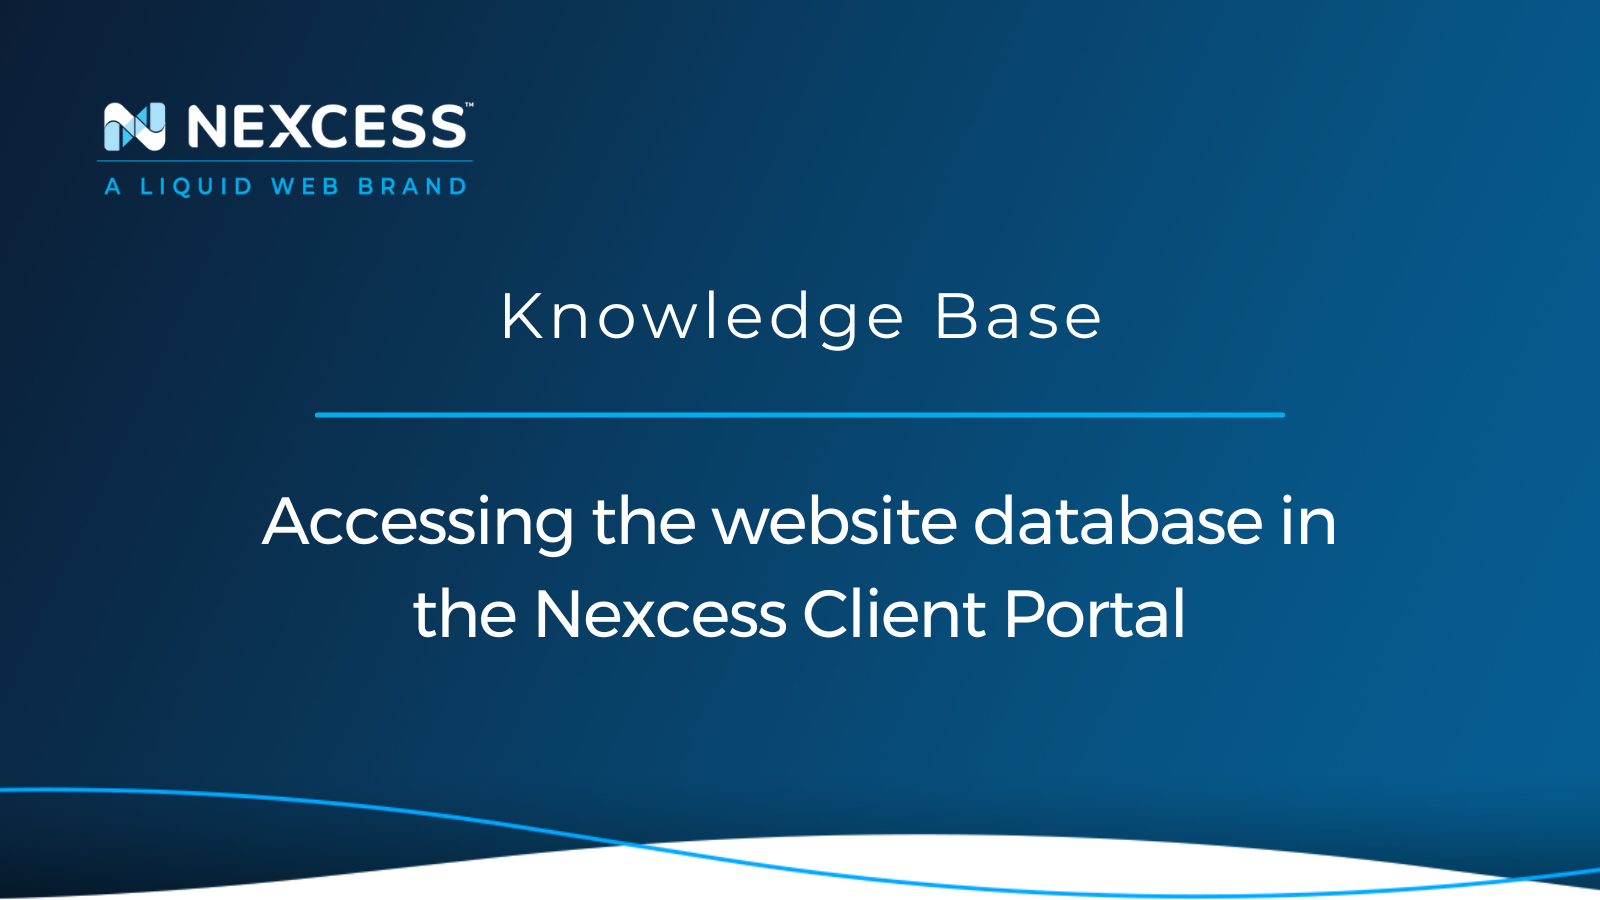 Accessing the website database in the Nexcess Client Portal